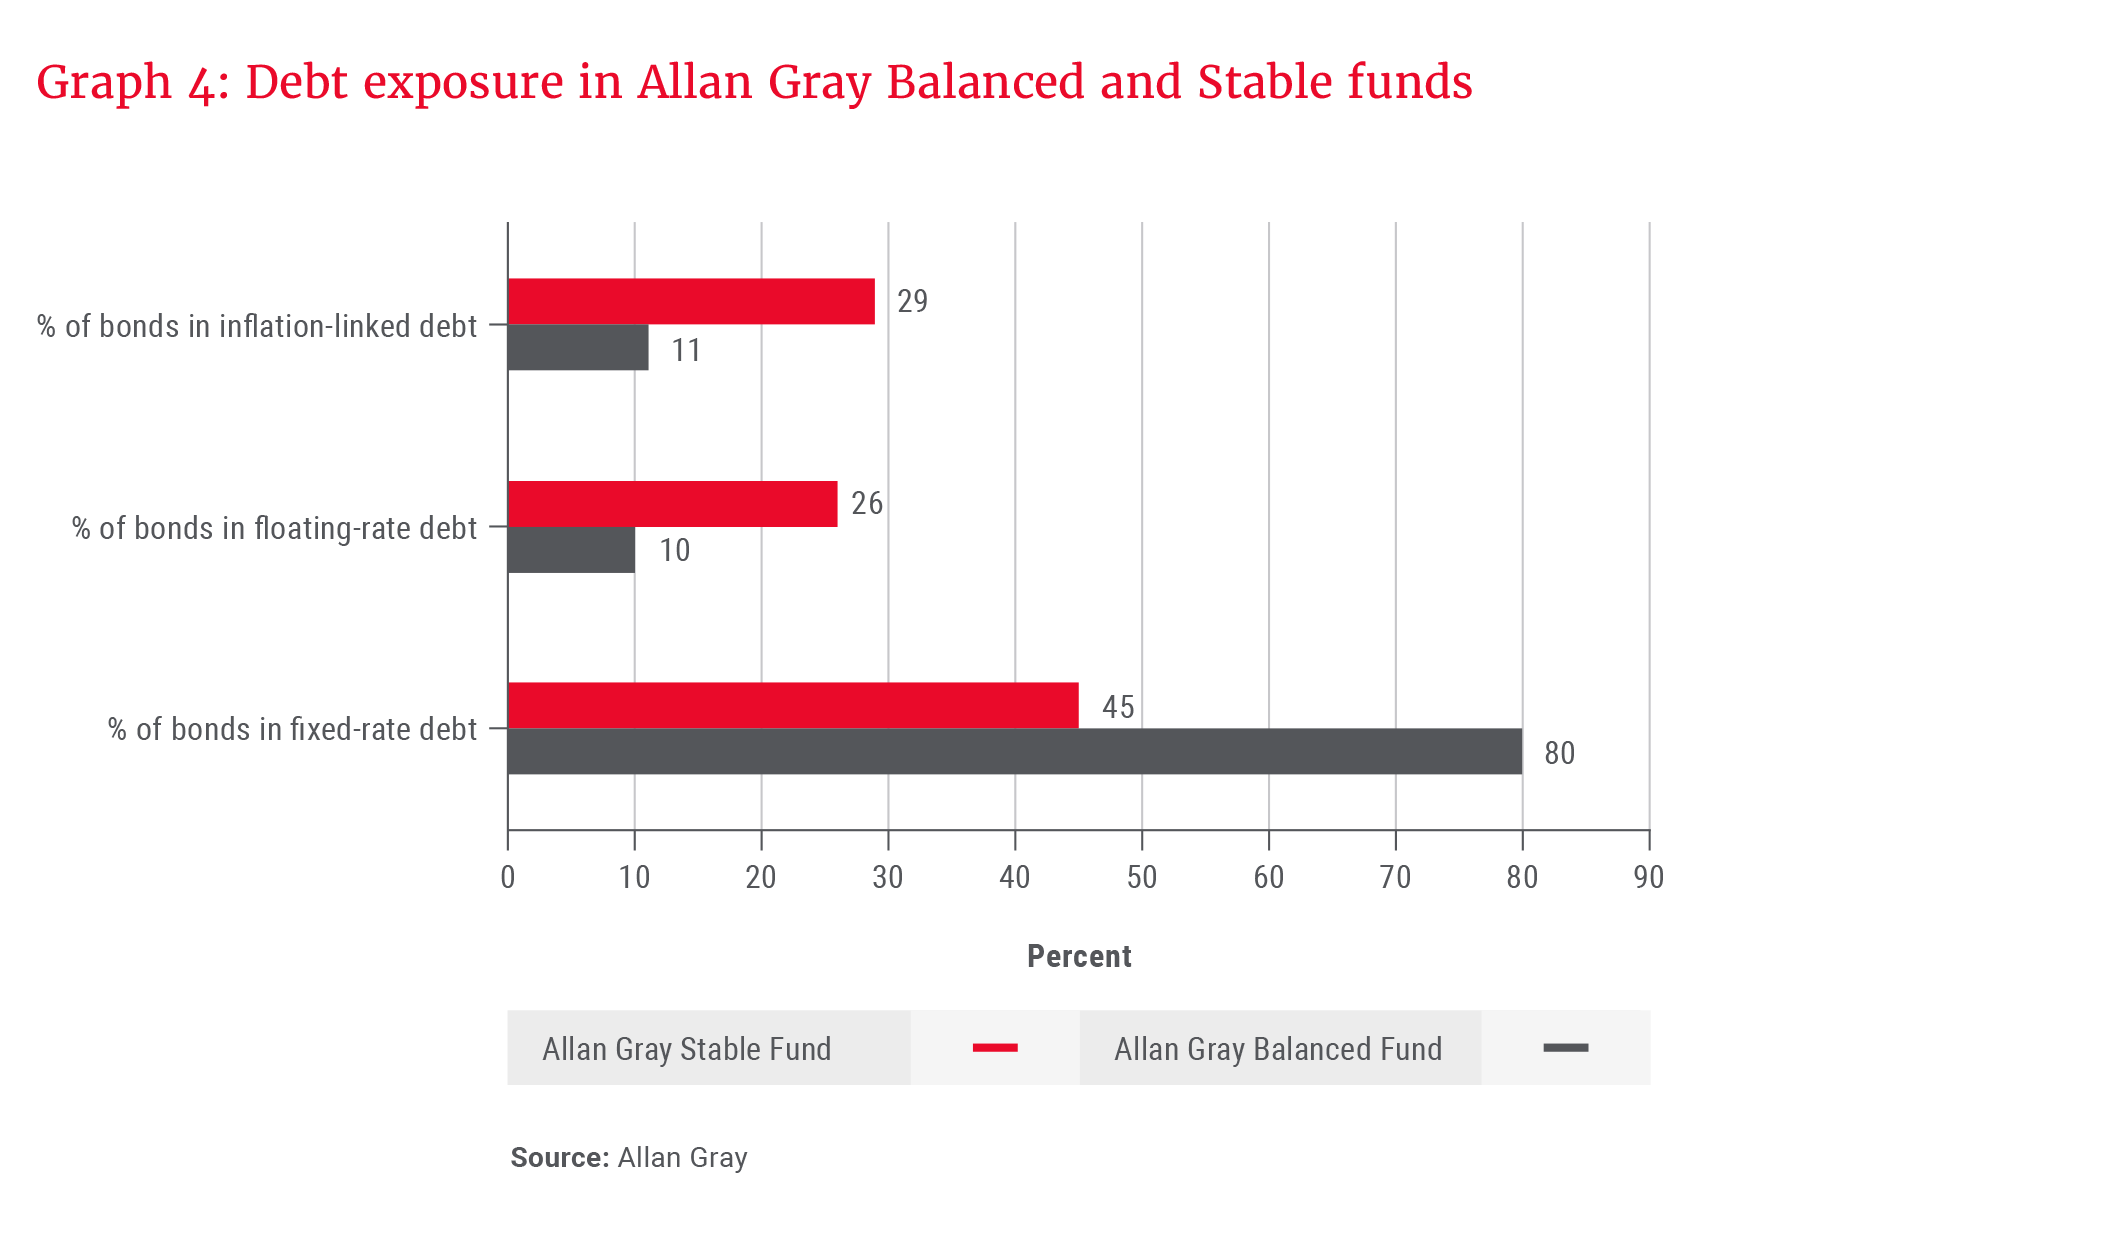 Debt exposure in Allan Gray Balanced and Stable Funds